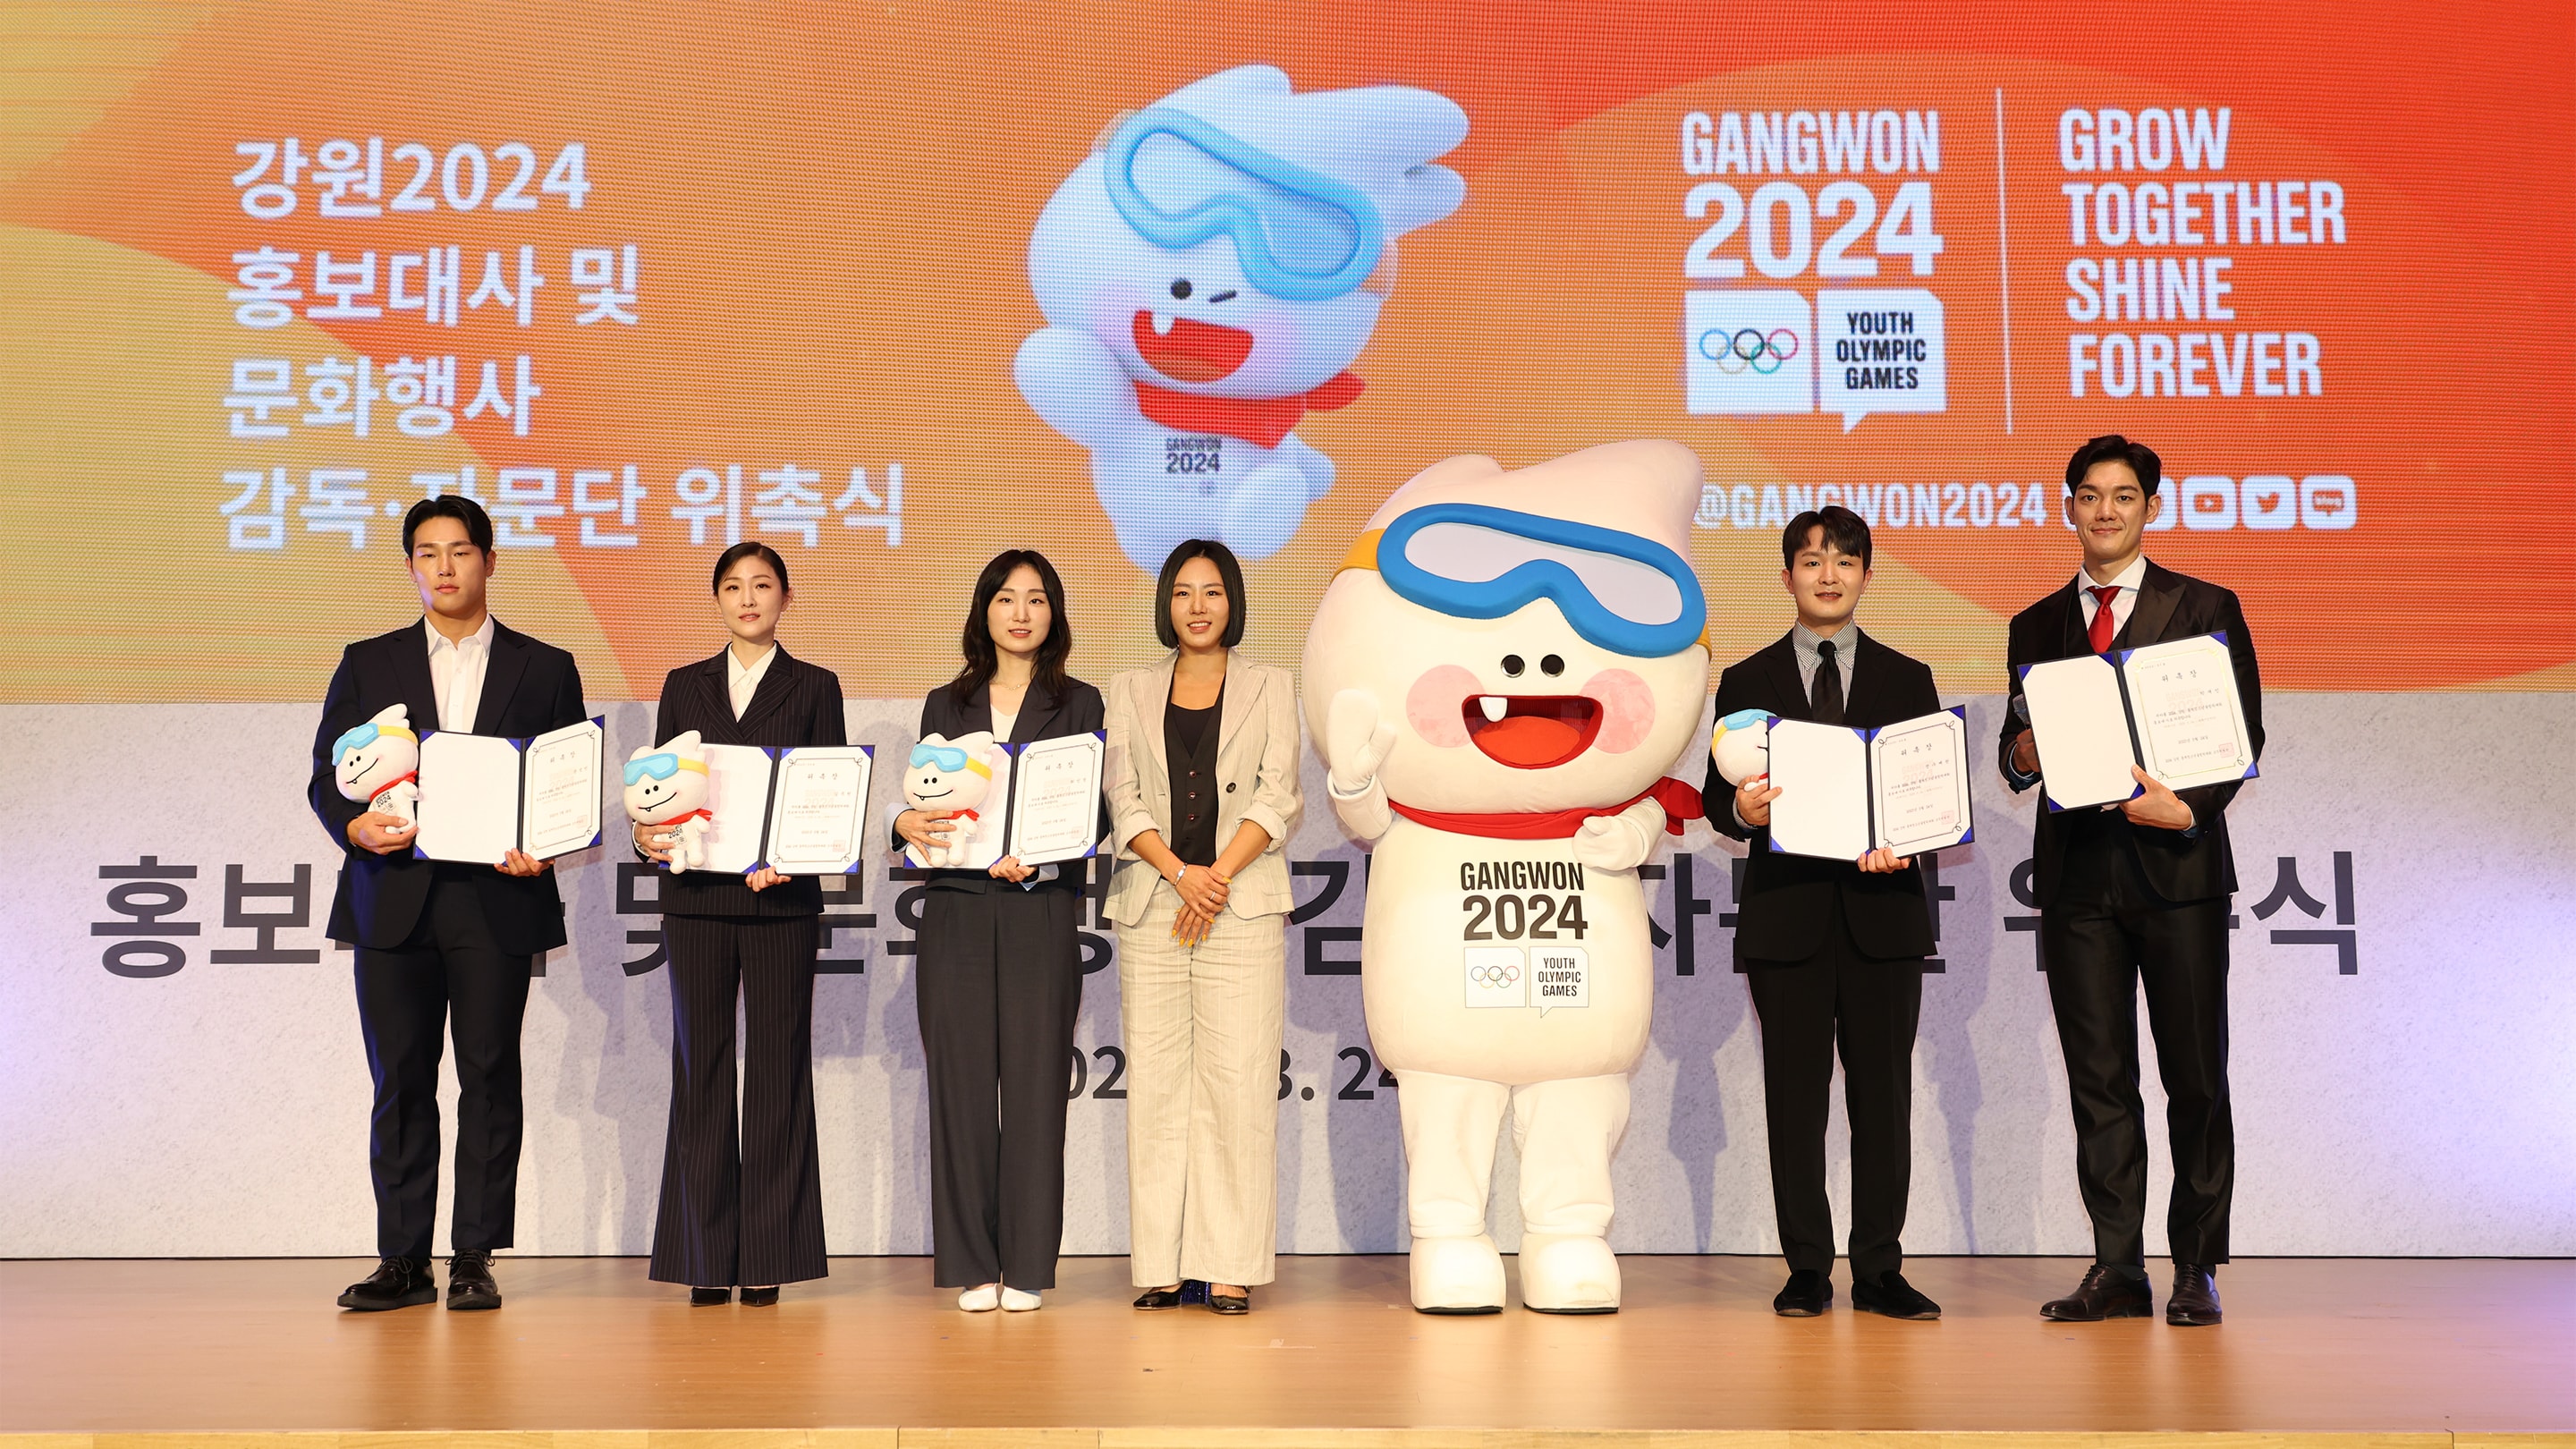 Gangwon 2024 celebrates 300 days to go with new Ambassadors and mascot